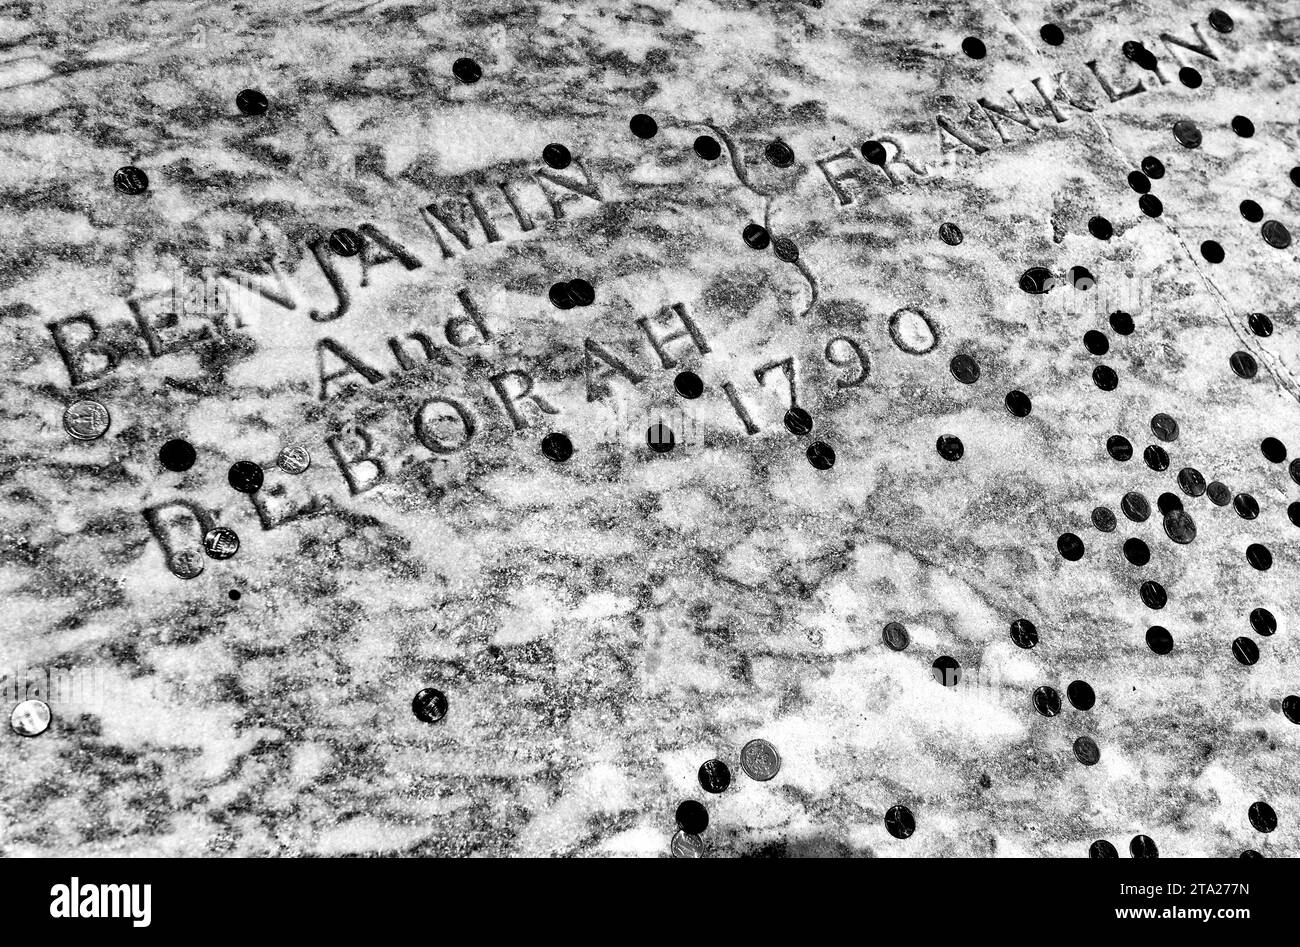 Benjamin Franklin grave covered in coins at Christ Church Burial Ground in Philadelphia, PA, USA Stock Photo